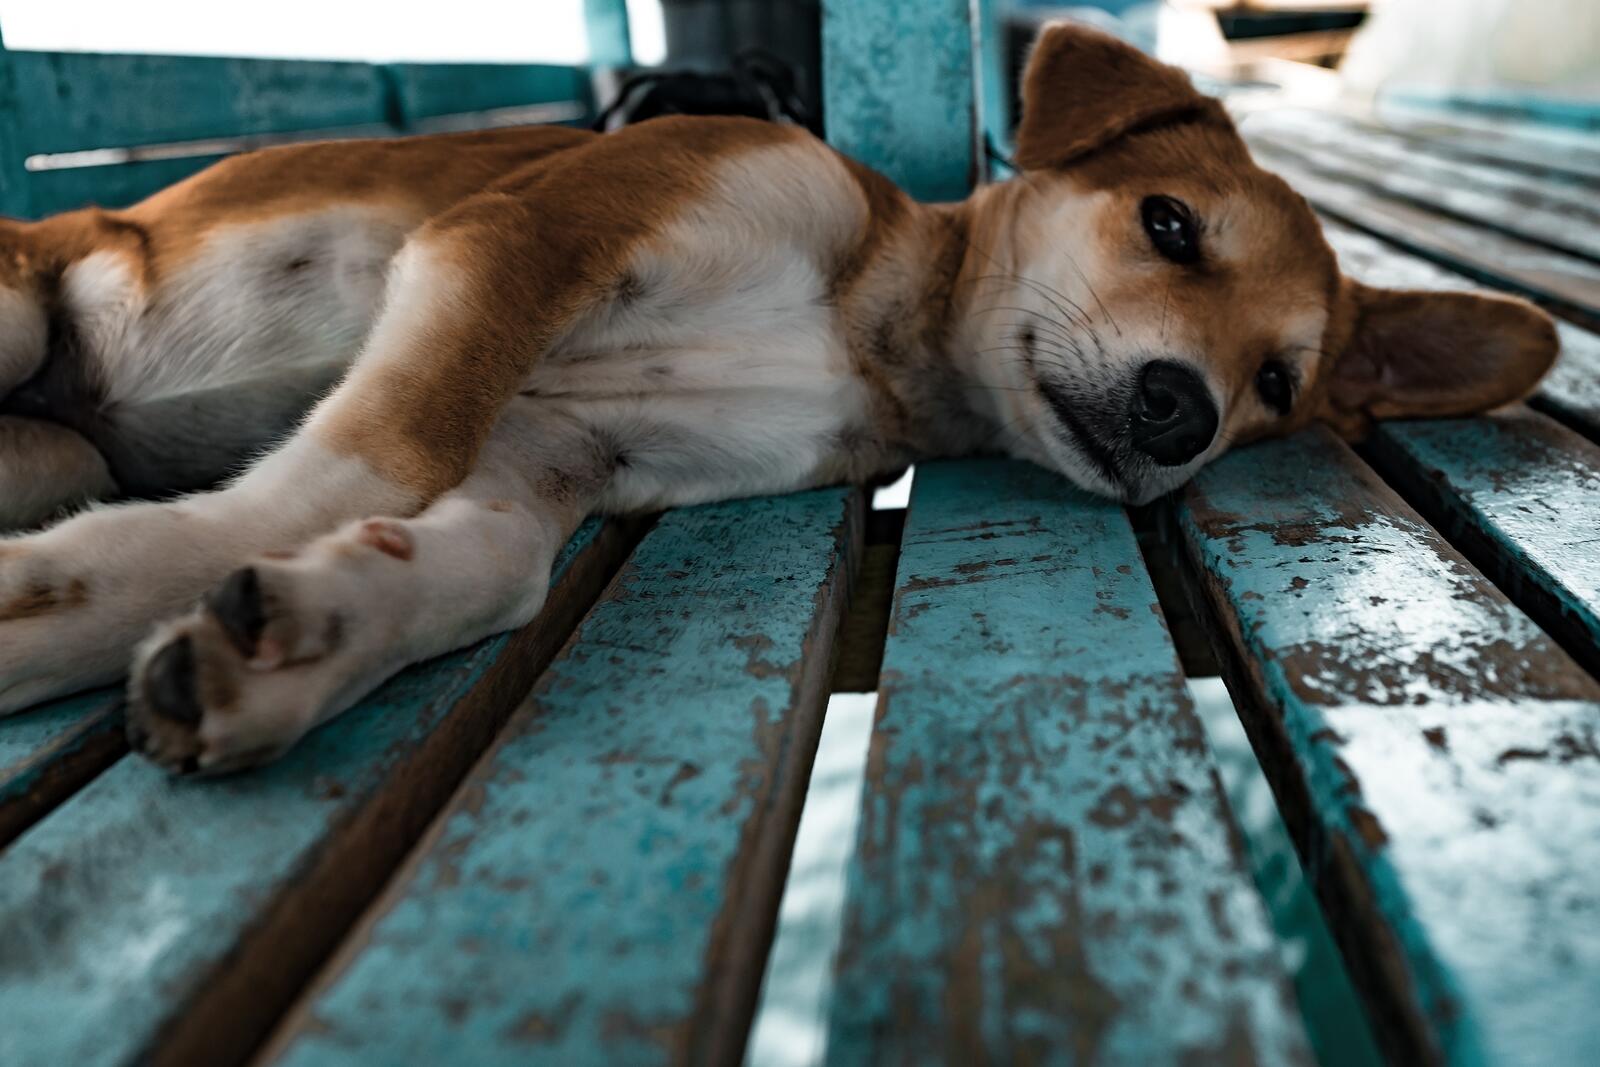 Free photo A dog resting on a wooden floor